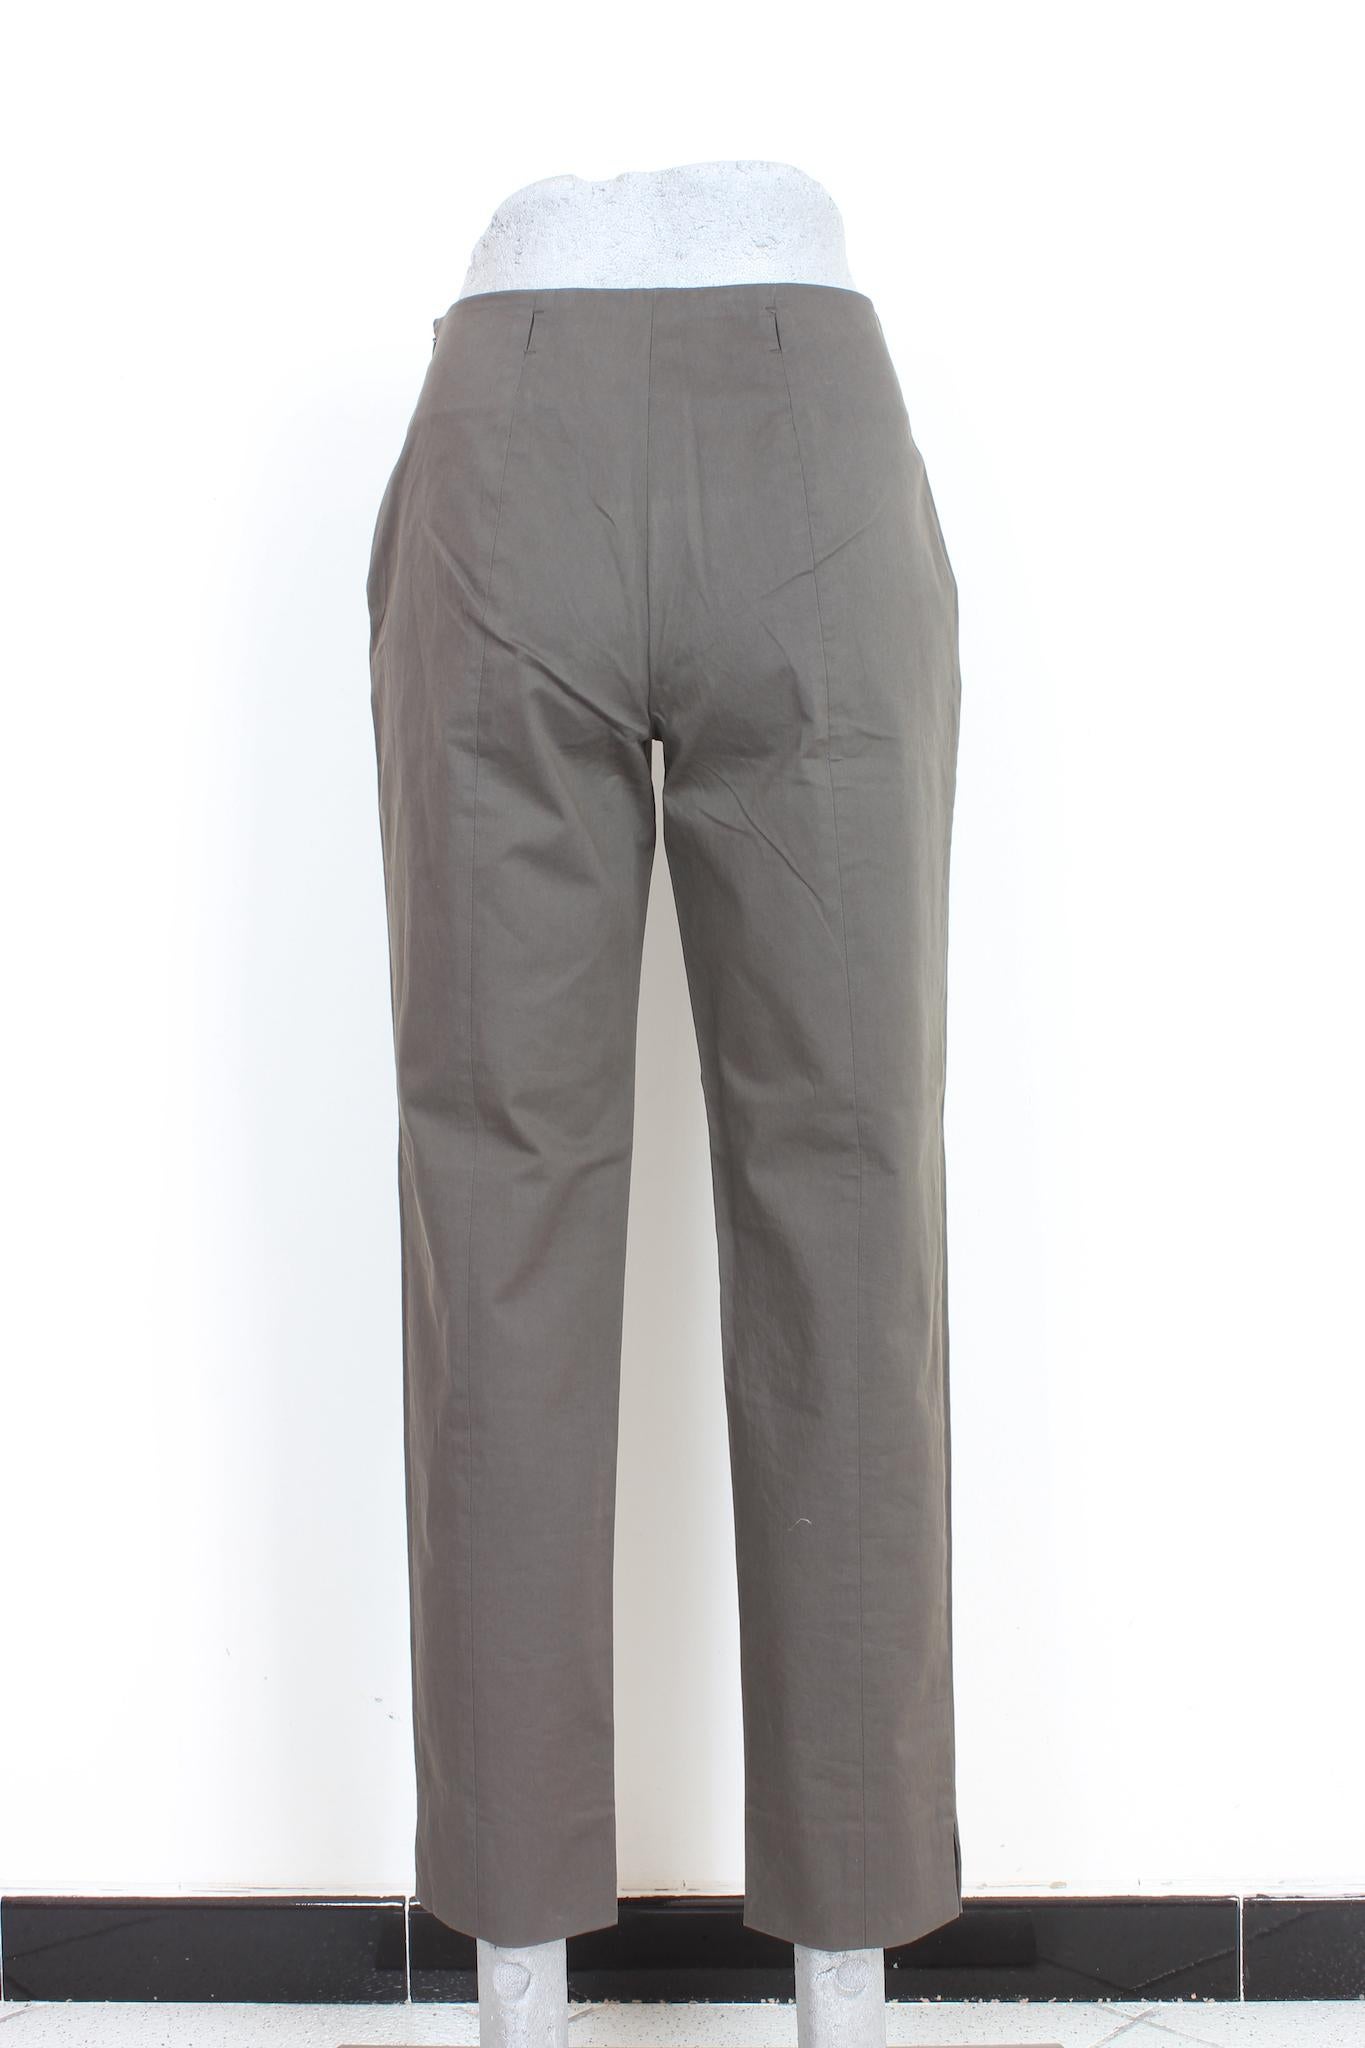 Max Mara Green Cotton Straight Pants In Excellent Condition For Sale In Brindisi, Bt